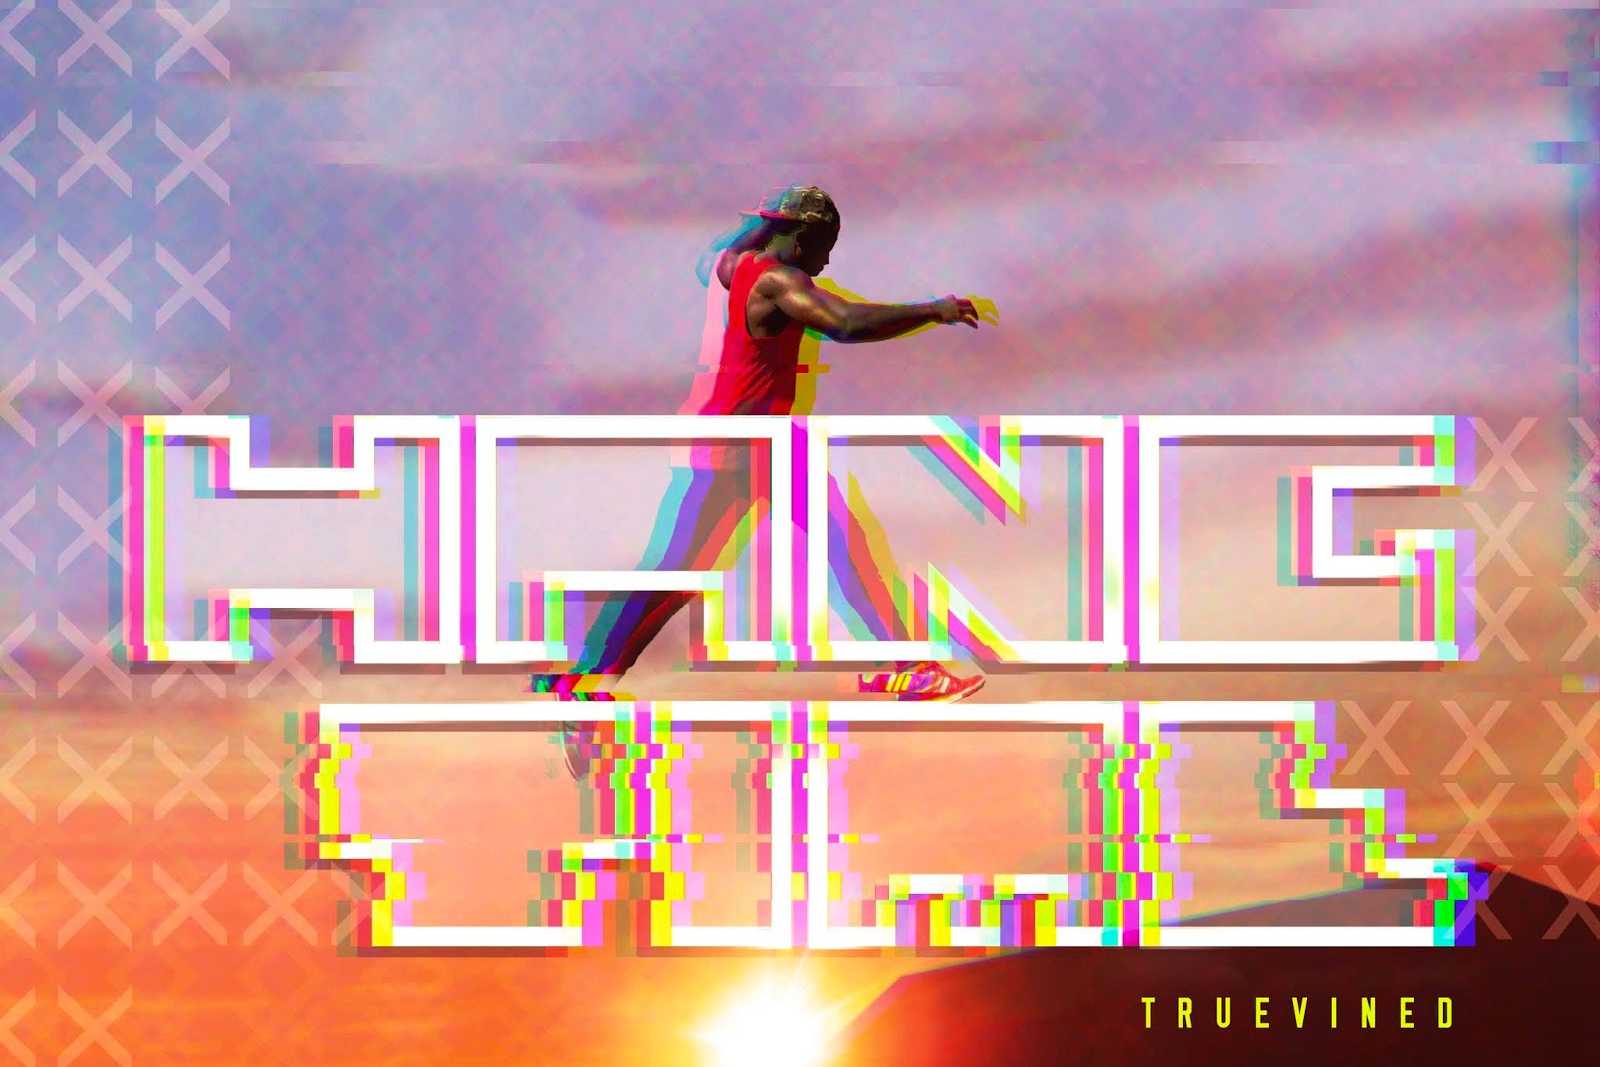 Truevined - Hang Time